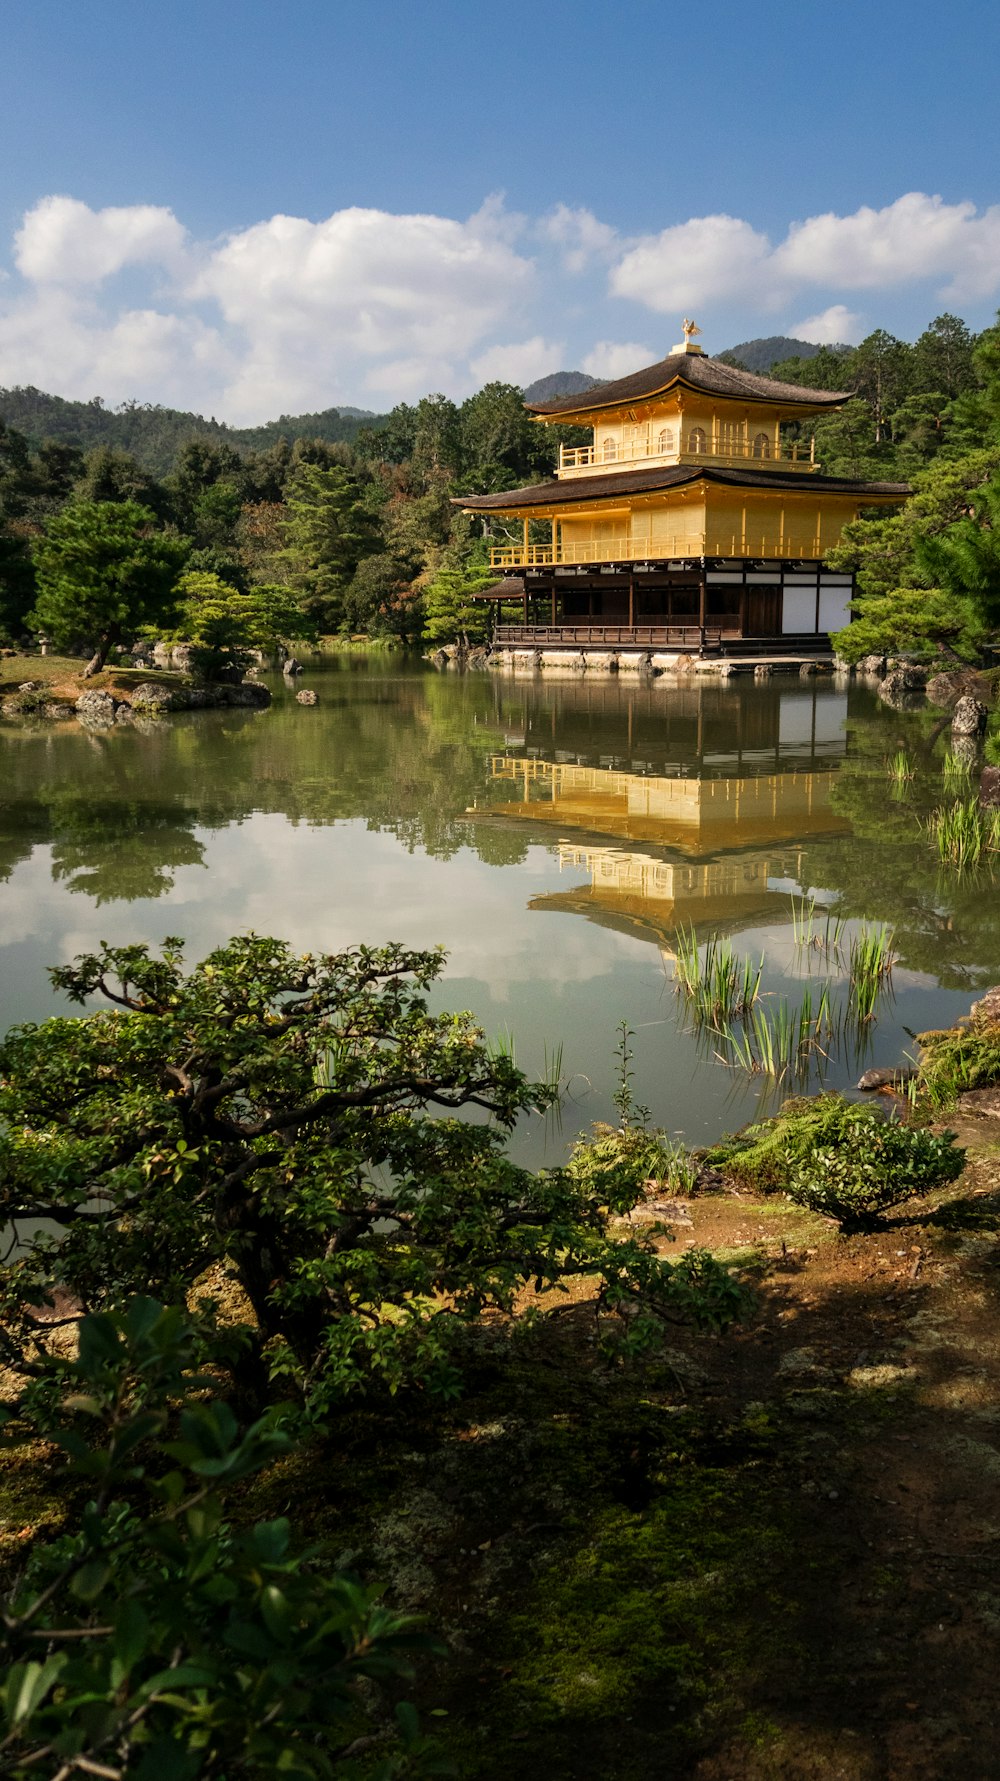 yellow temple near trees facing body of water